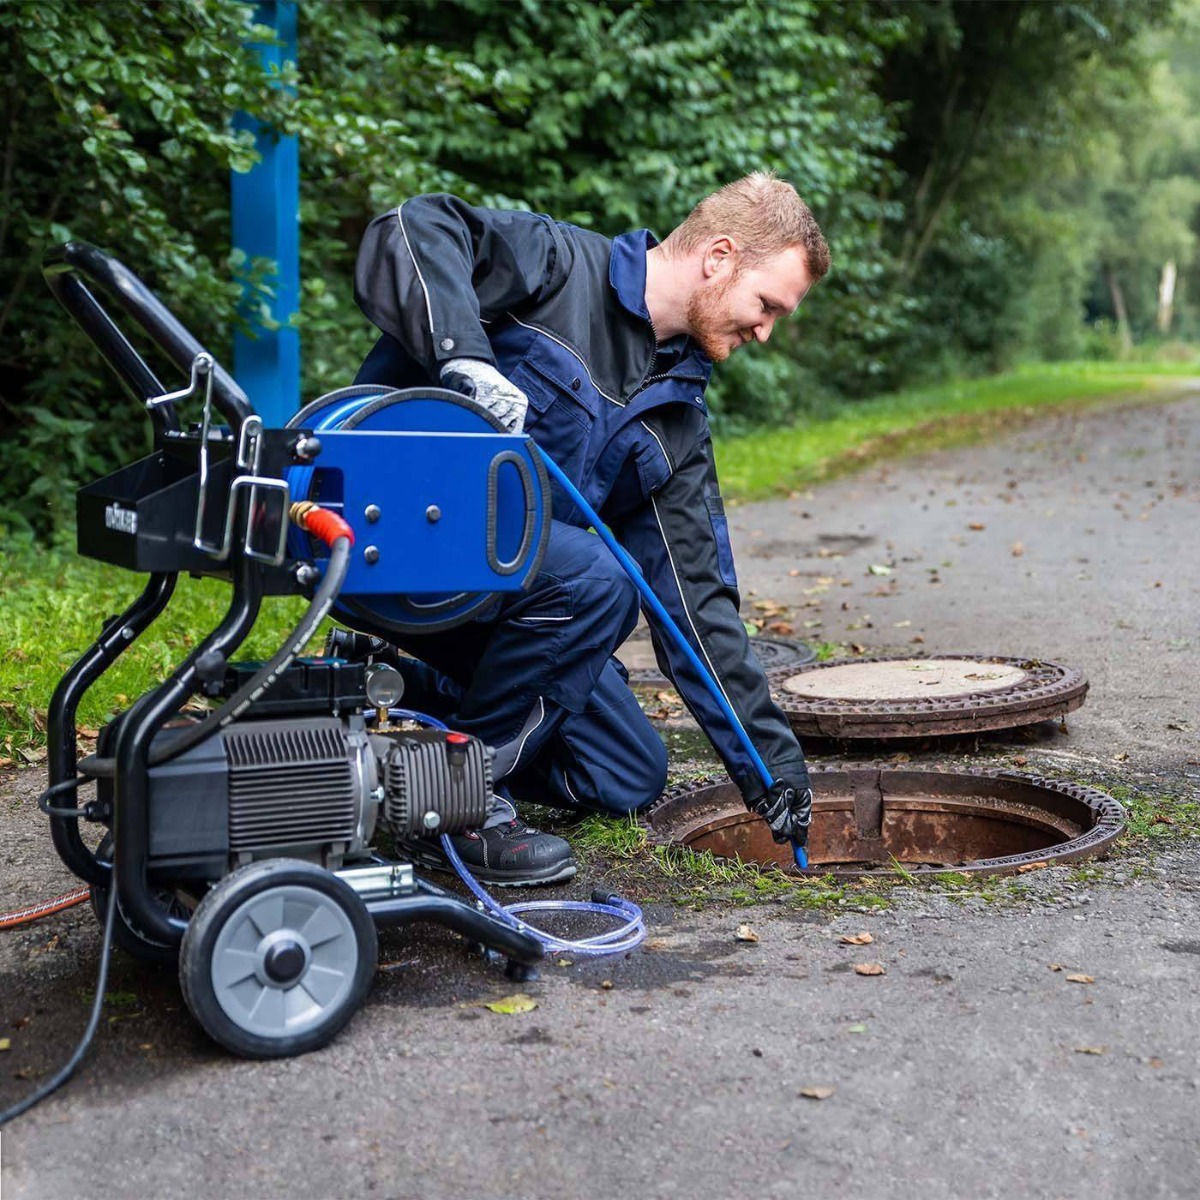 Wöhler WO11250 Set HR 300 High-Pressure Cleaner in action cleaning a drain..